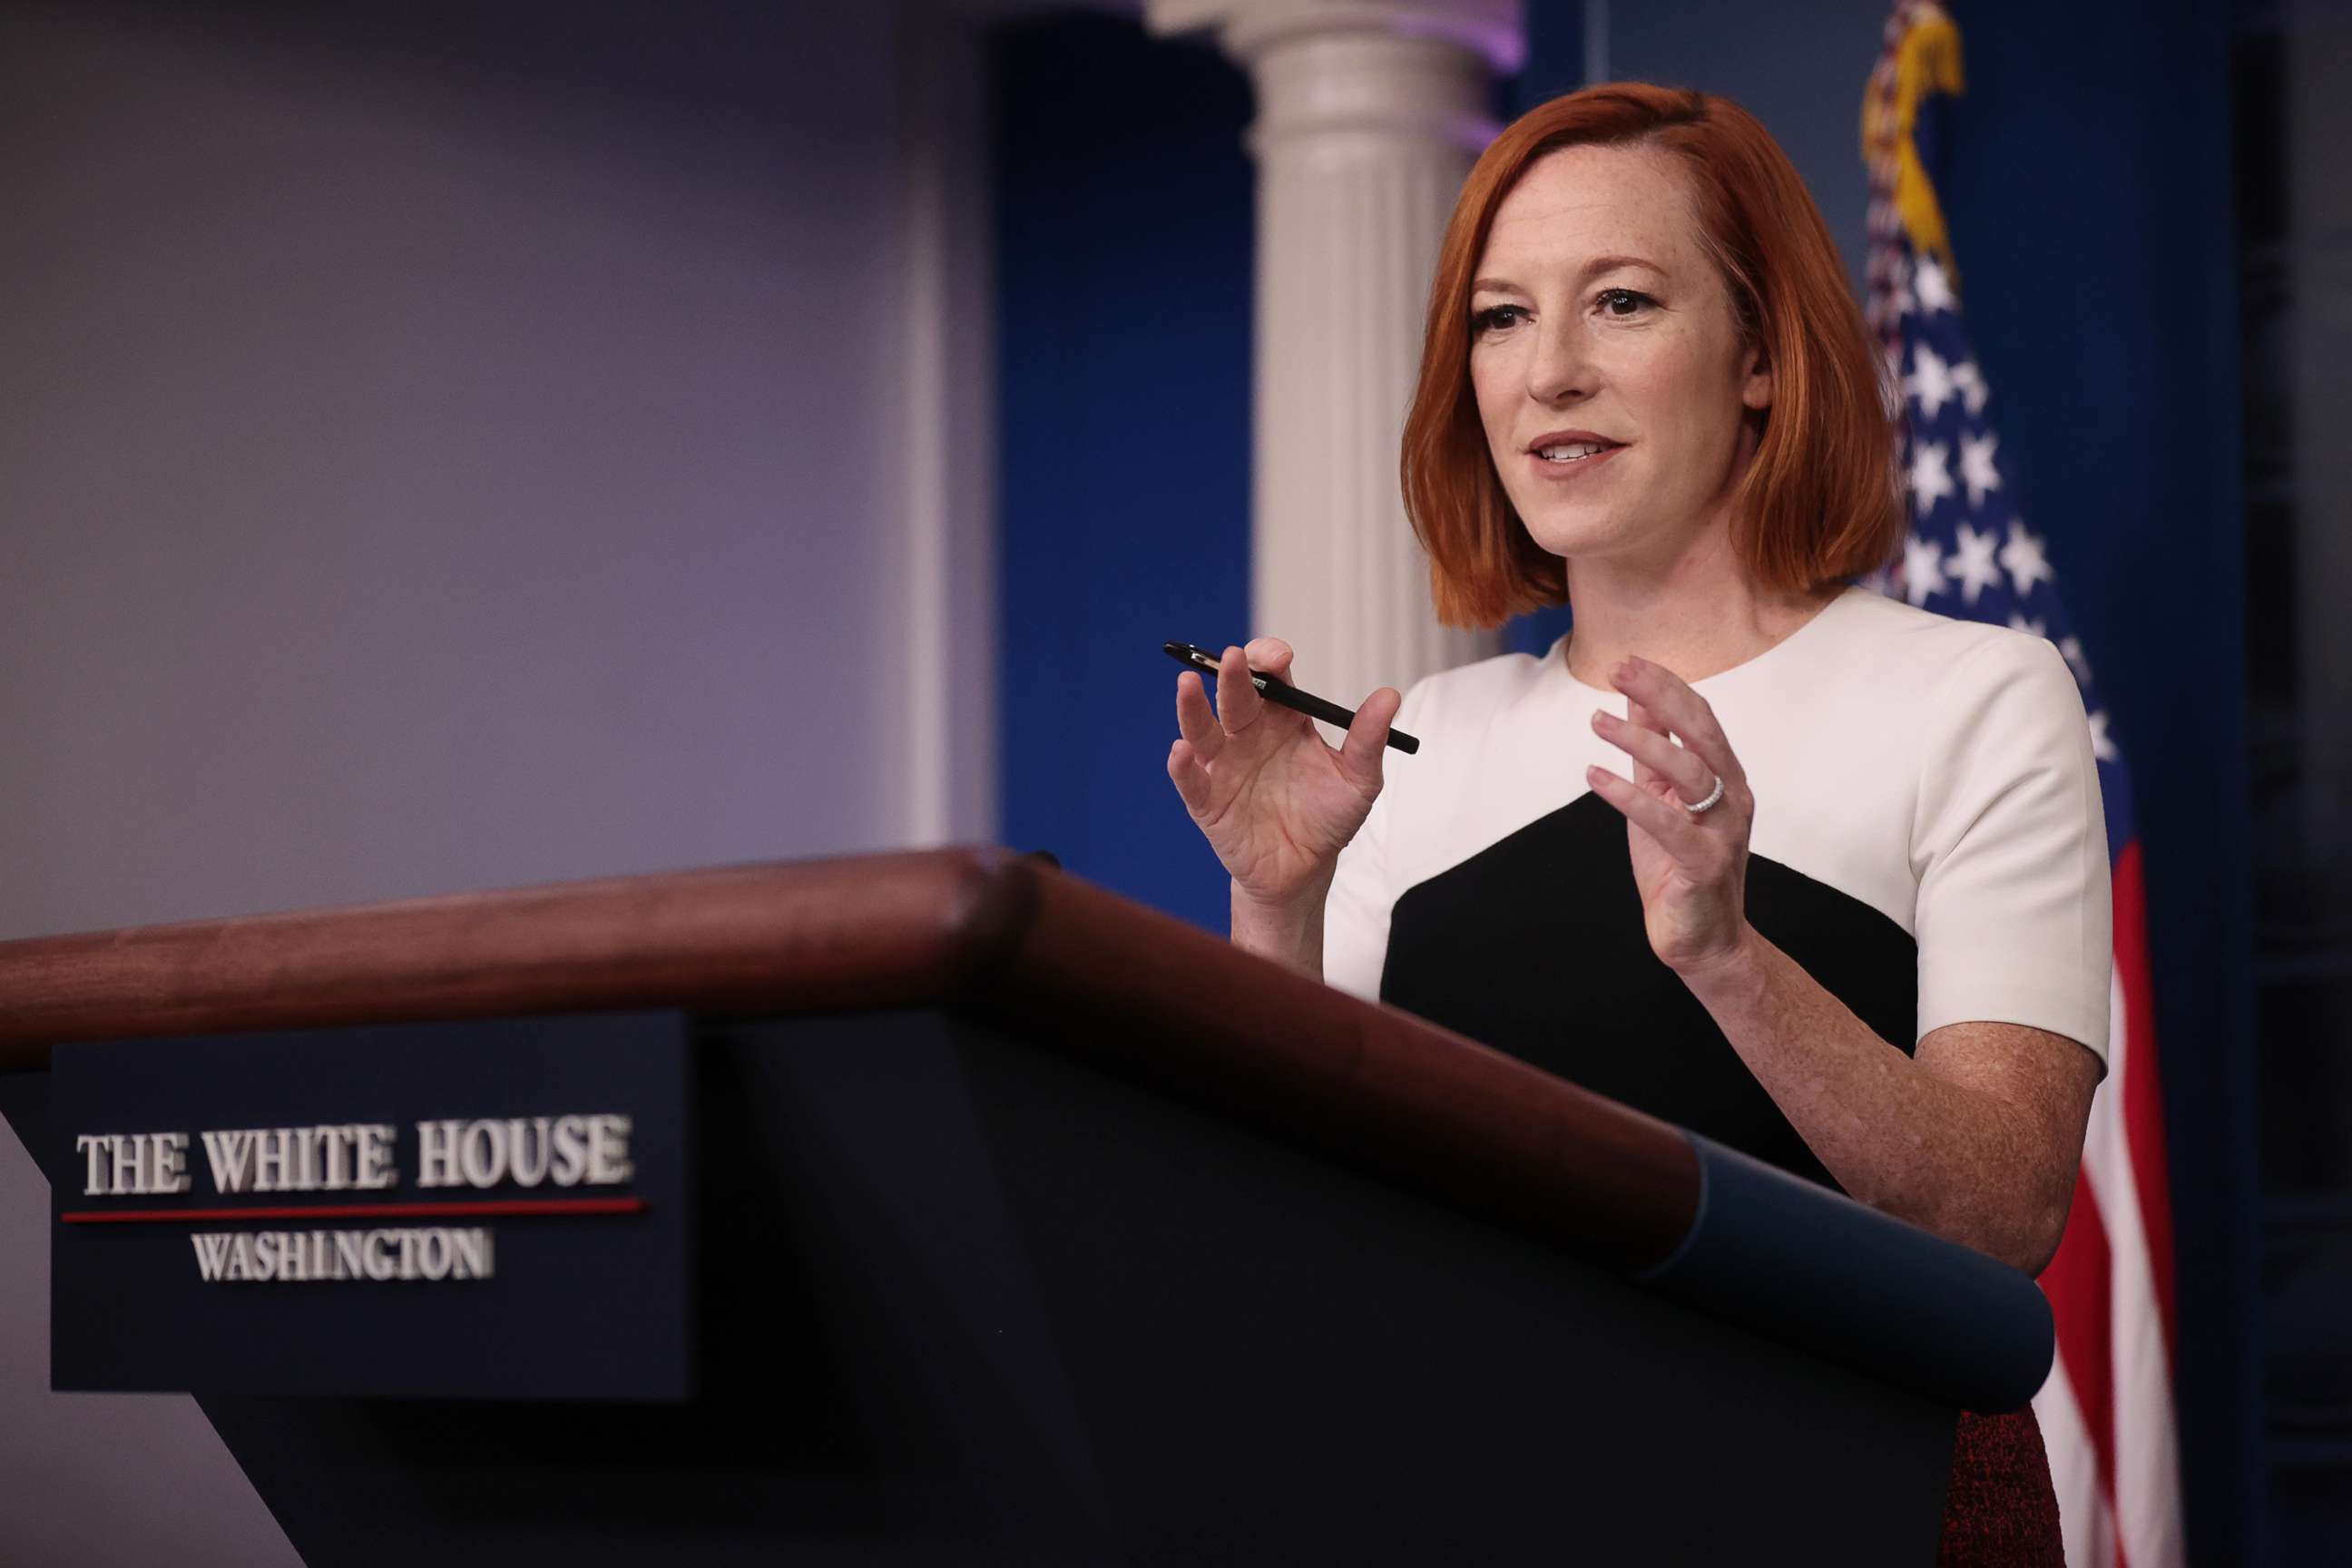 PHOTO: White House Press Secretary Jen Psaki talks to reporters during the daily press conference in the Brady Press Briefing Room at the White House on Dec 6, 2021 in Washington, D.C.